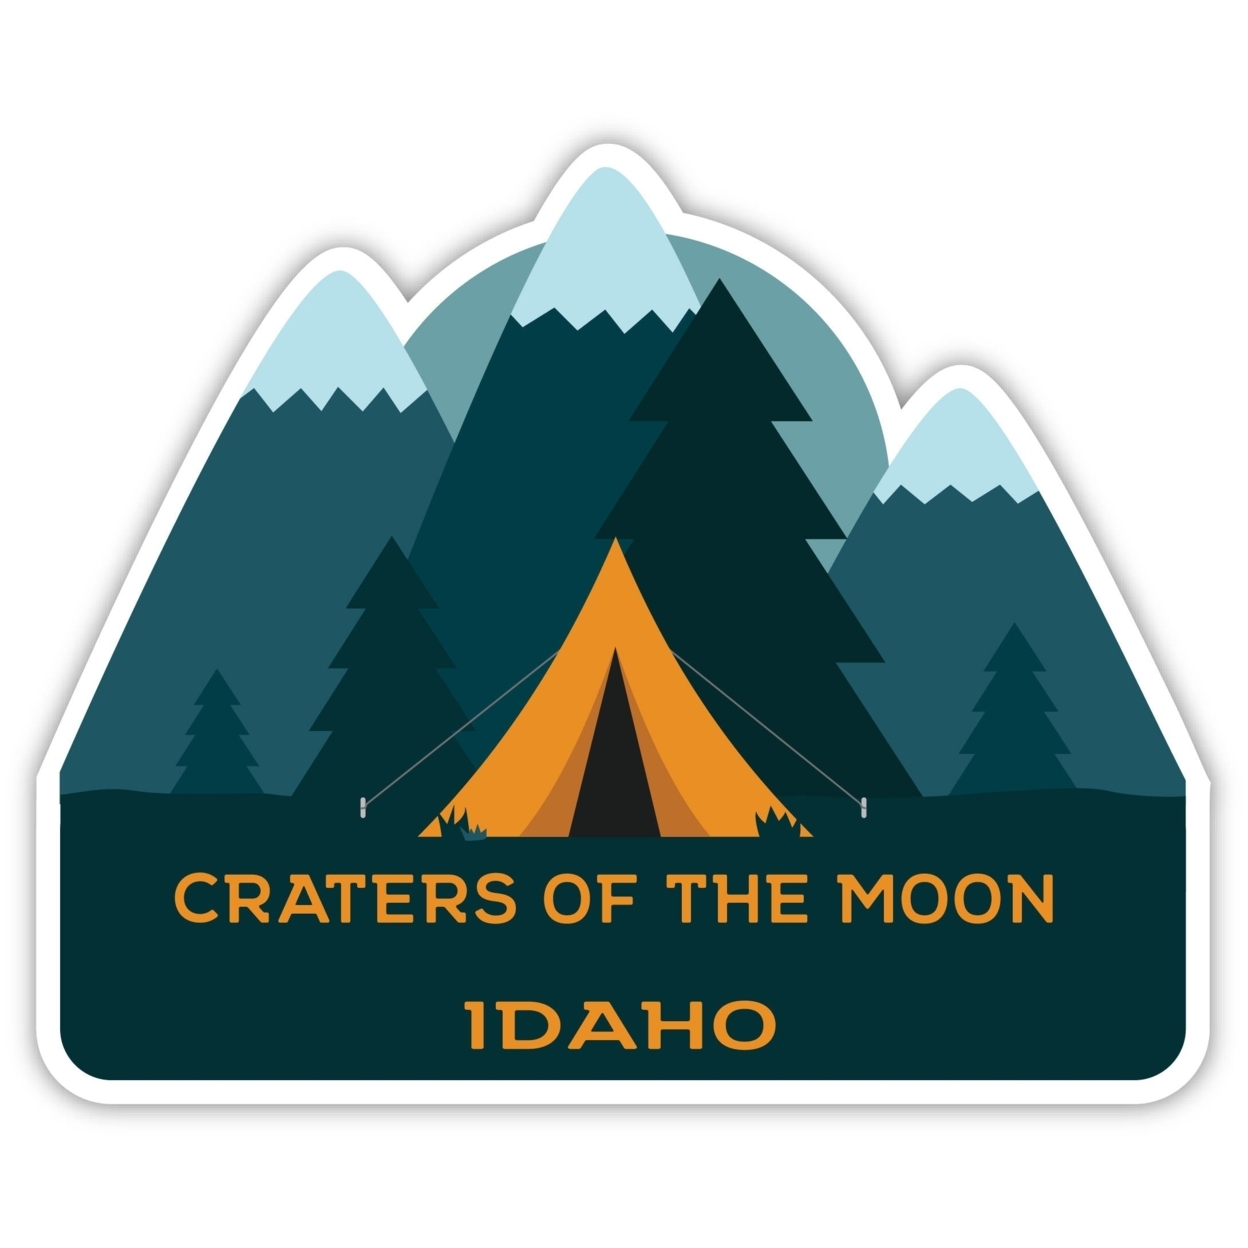 Craters Of The Moon Idaho Souvenir Decorative Stickers (Choose Theme And Size) - 4-Pack, 6-Inch, Tent